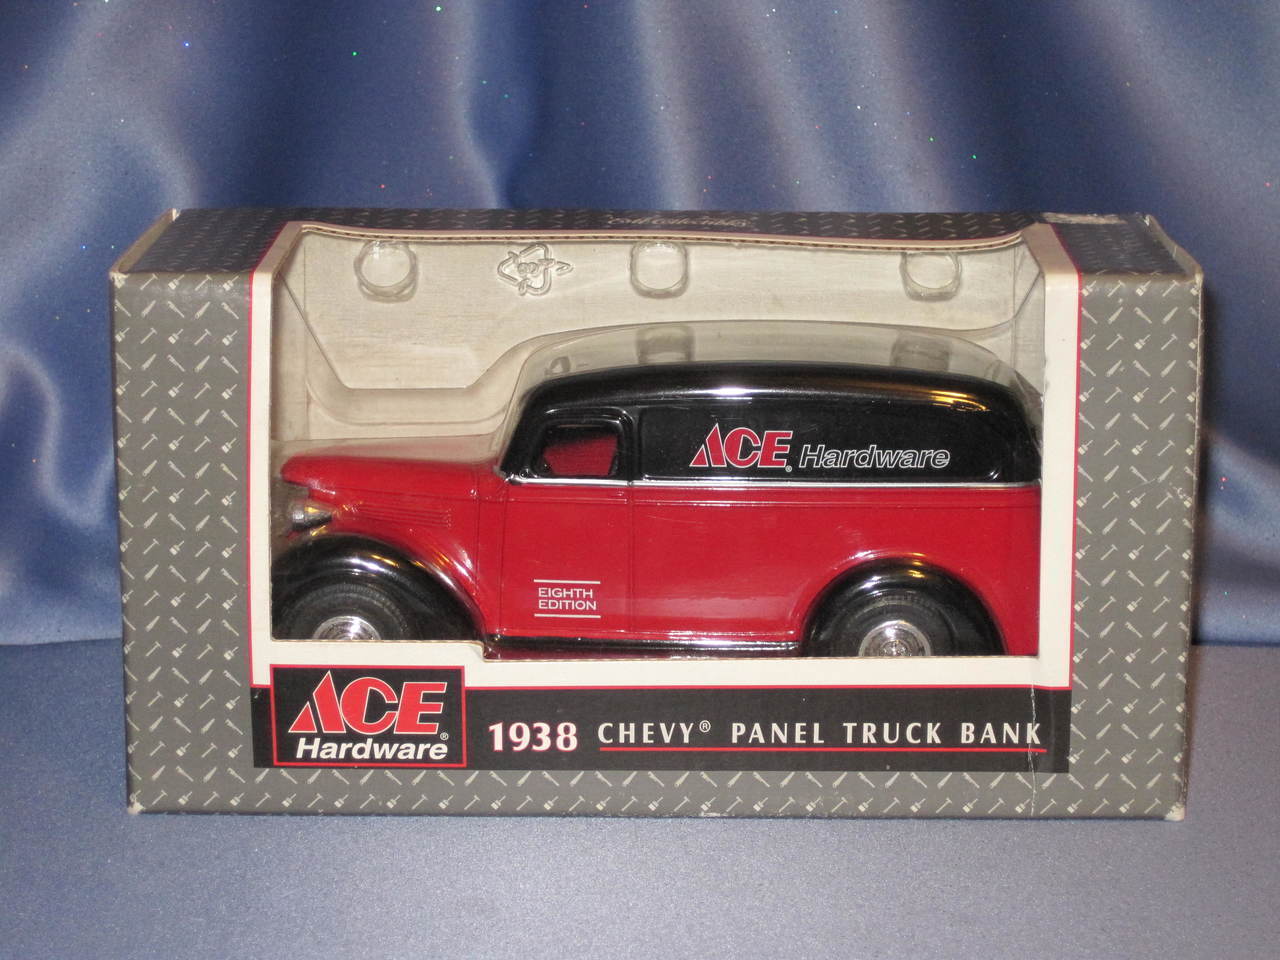 Primary image for Ertl Ace Hardware 1938 Chevy Panel Truck Bank.